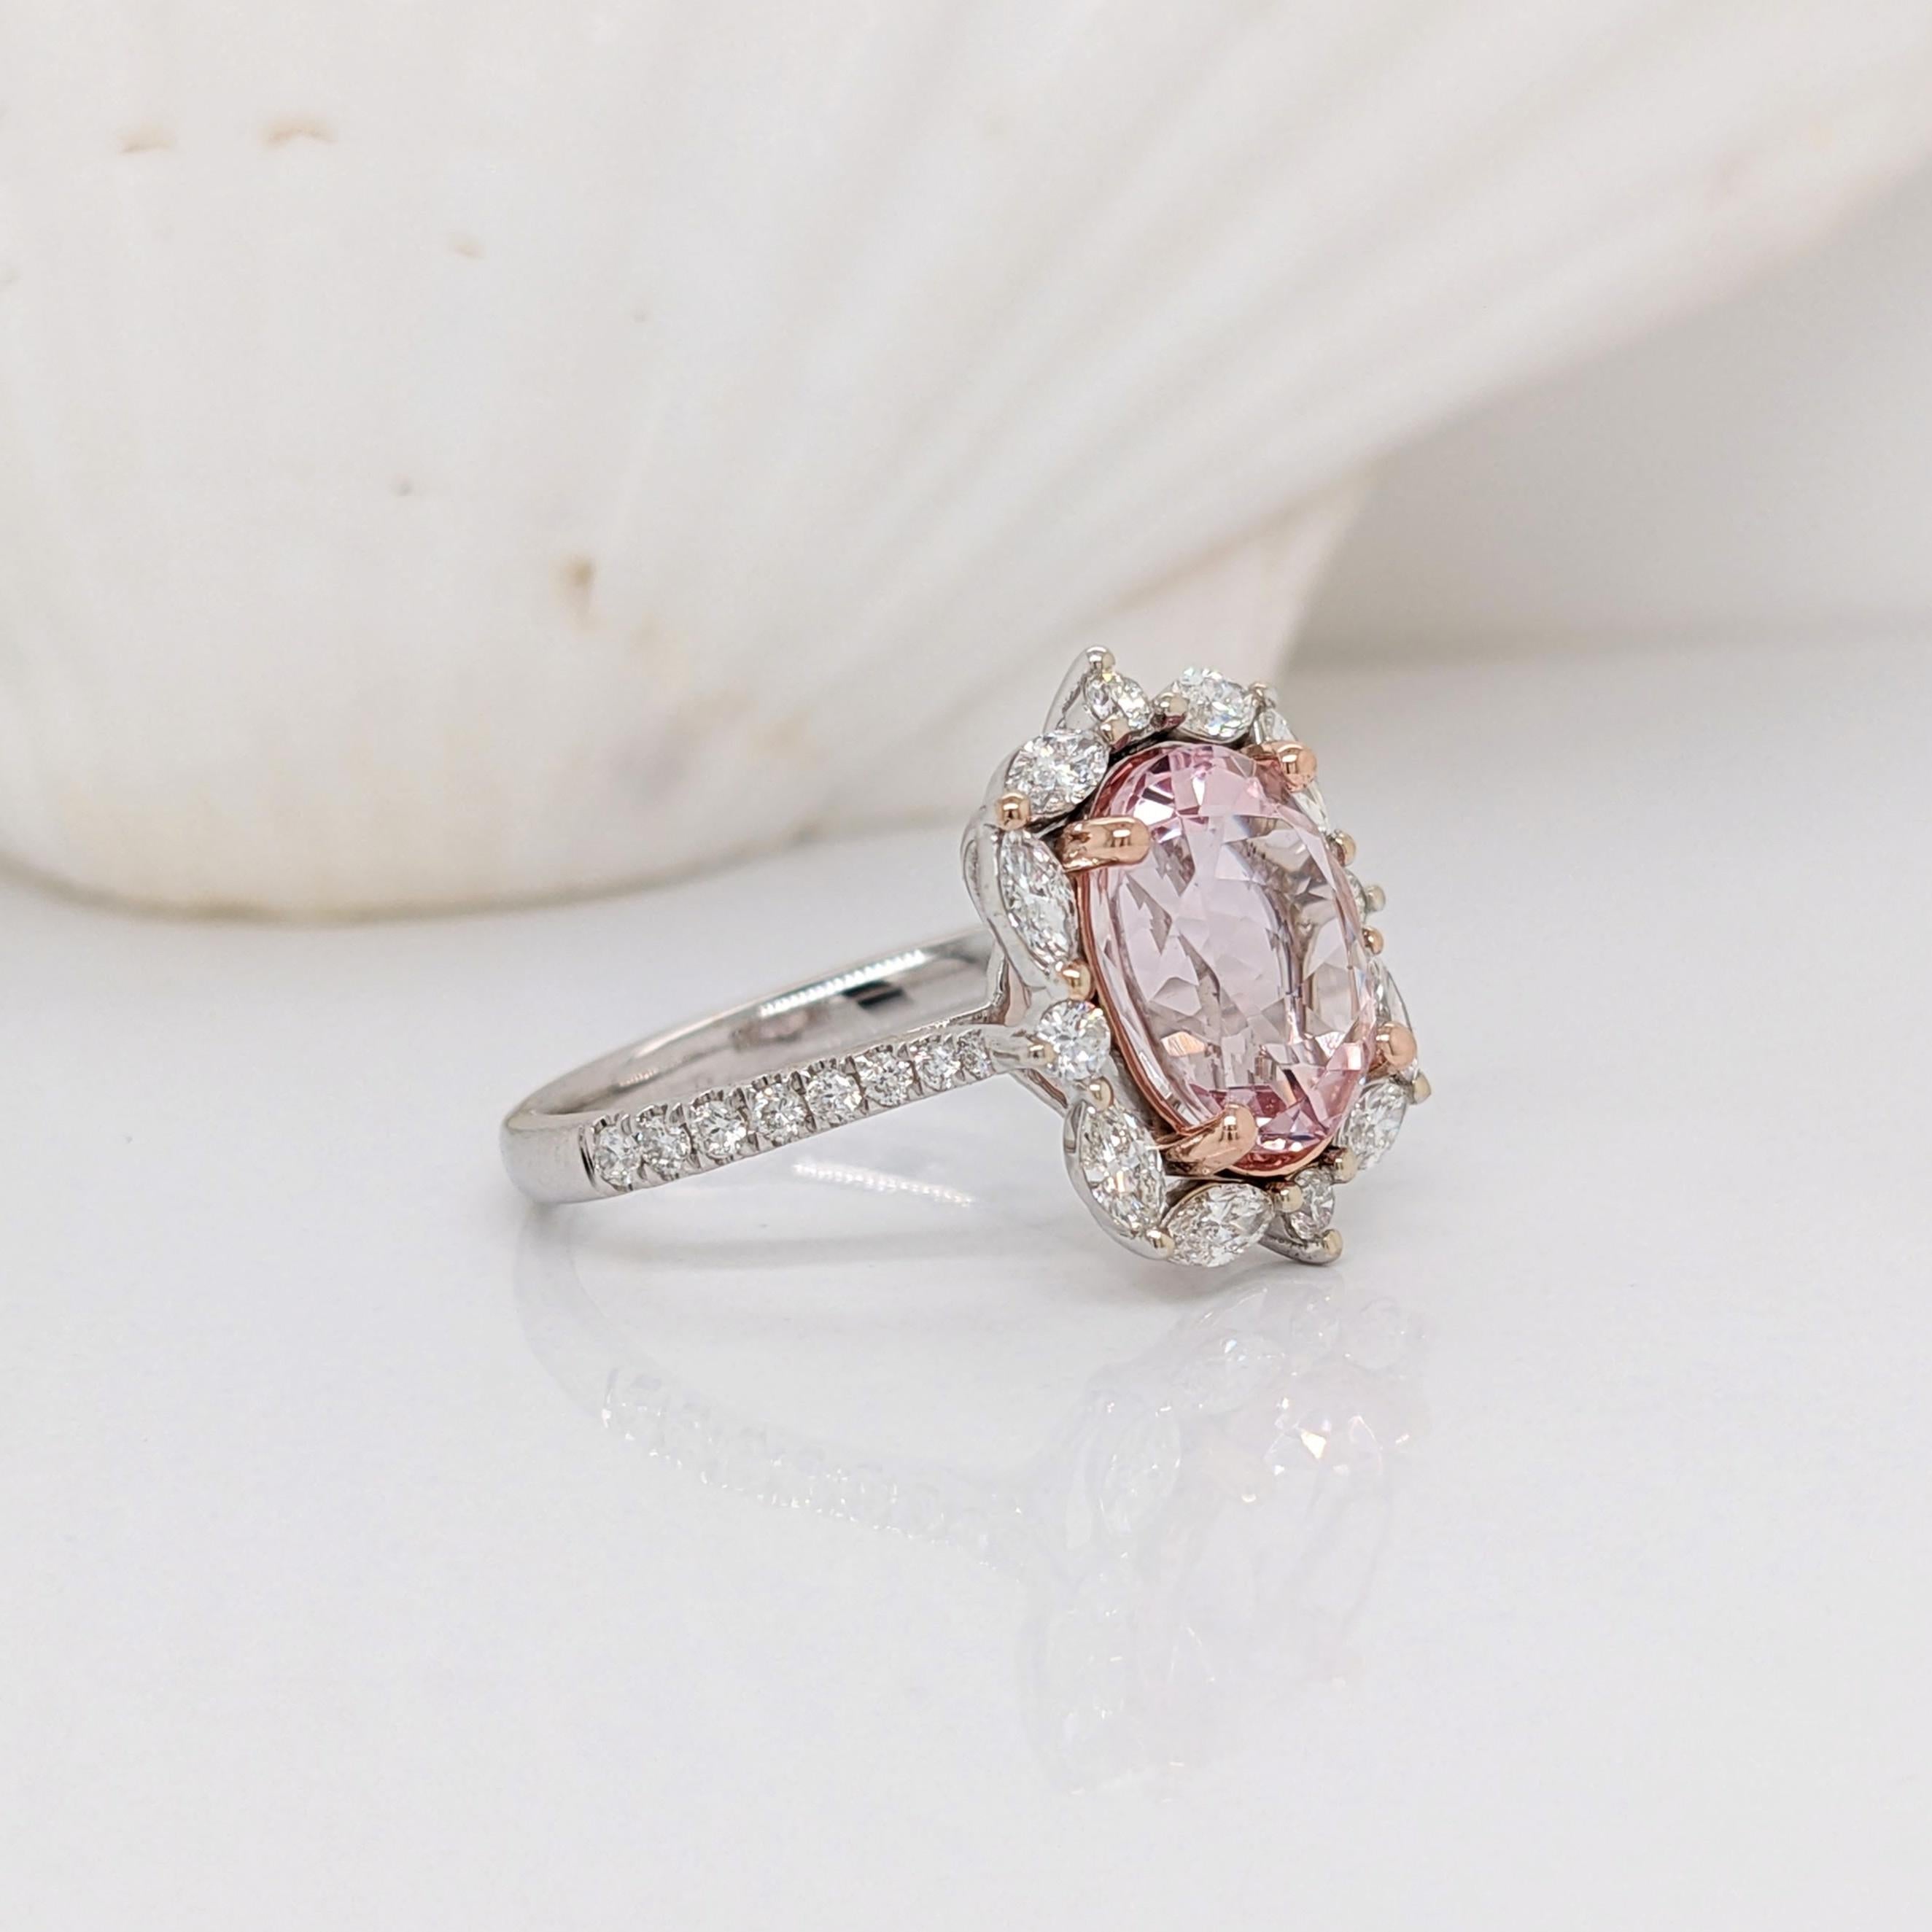 Oval Cut 3 ct Pink Morganite and Diamond Ring in Solid 14K Dual White/Rose Gold Oval 11x9